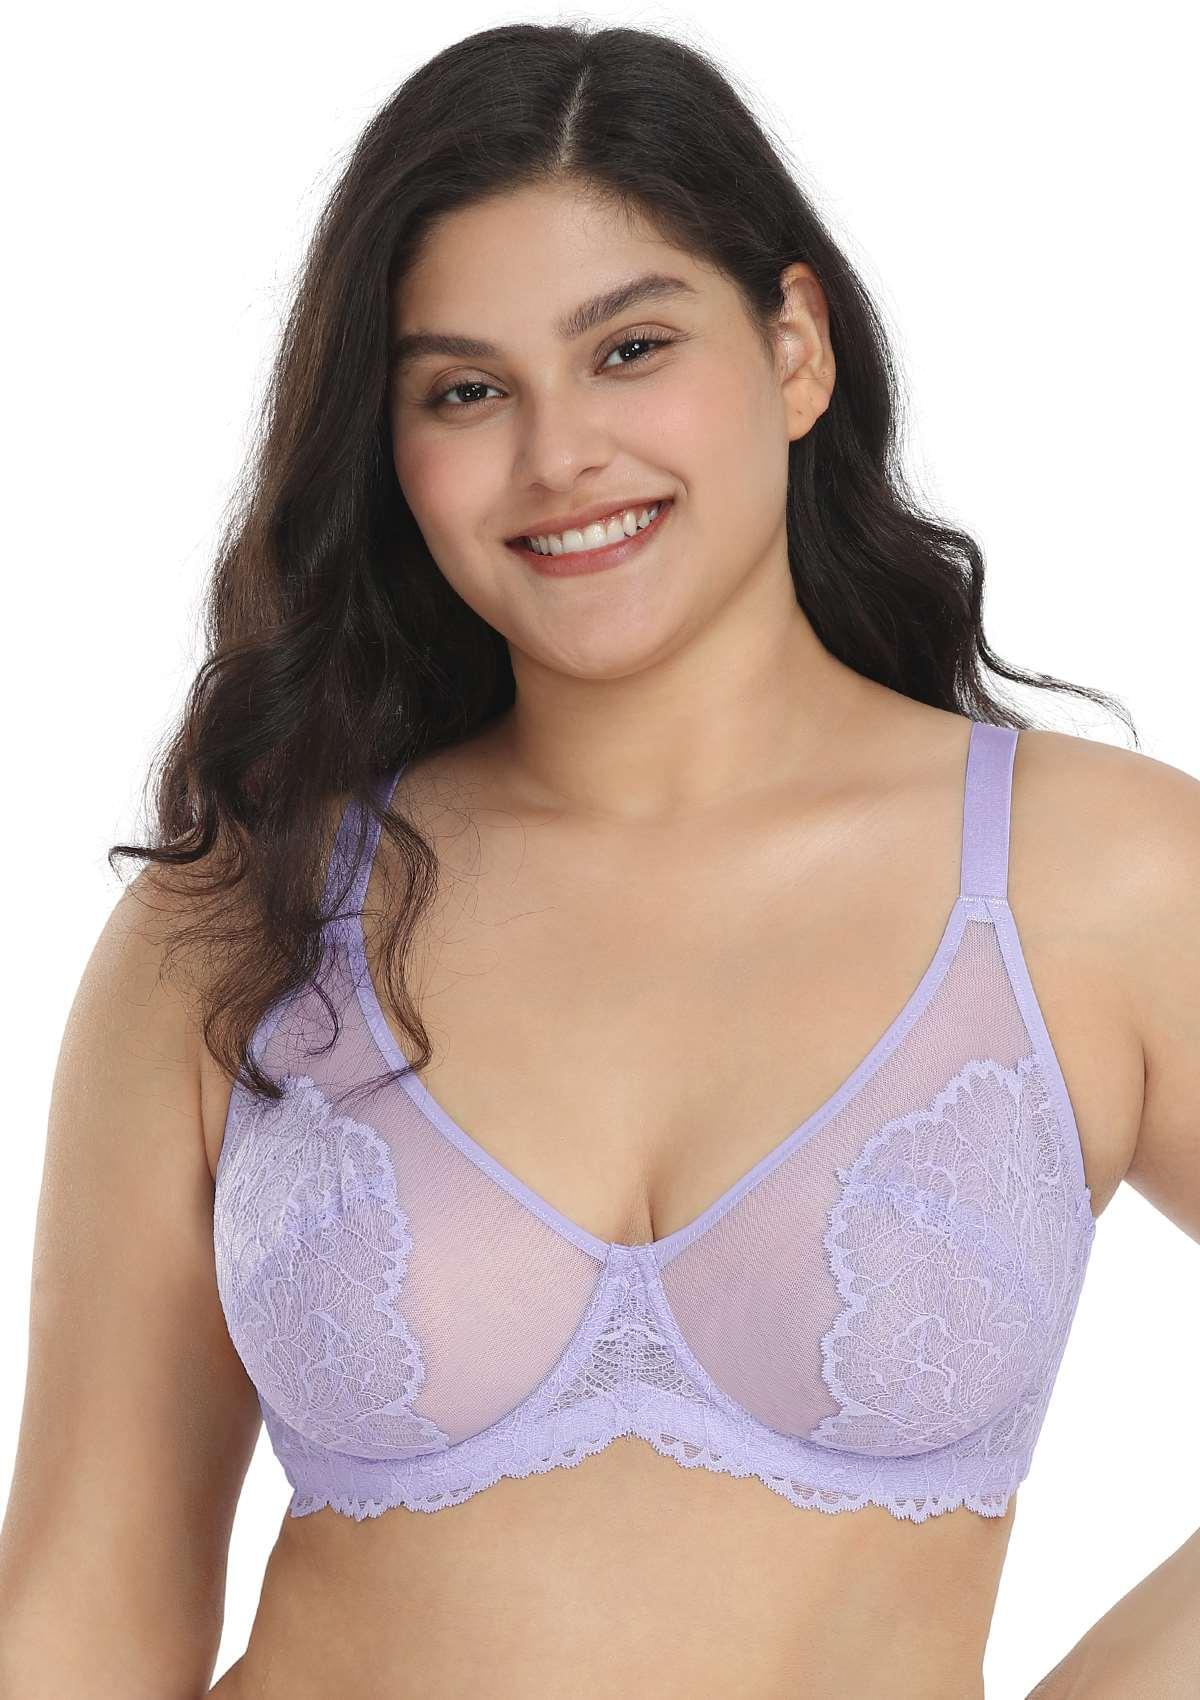 HSIA Blossom Transparent Lace Bra: Plus Size Wired Back Smoothing Bra - Light Purple / 38 / DDD/F